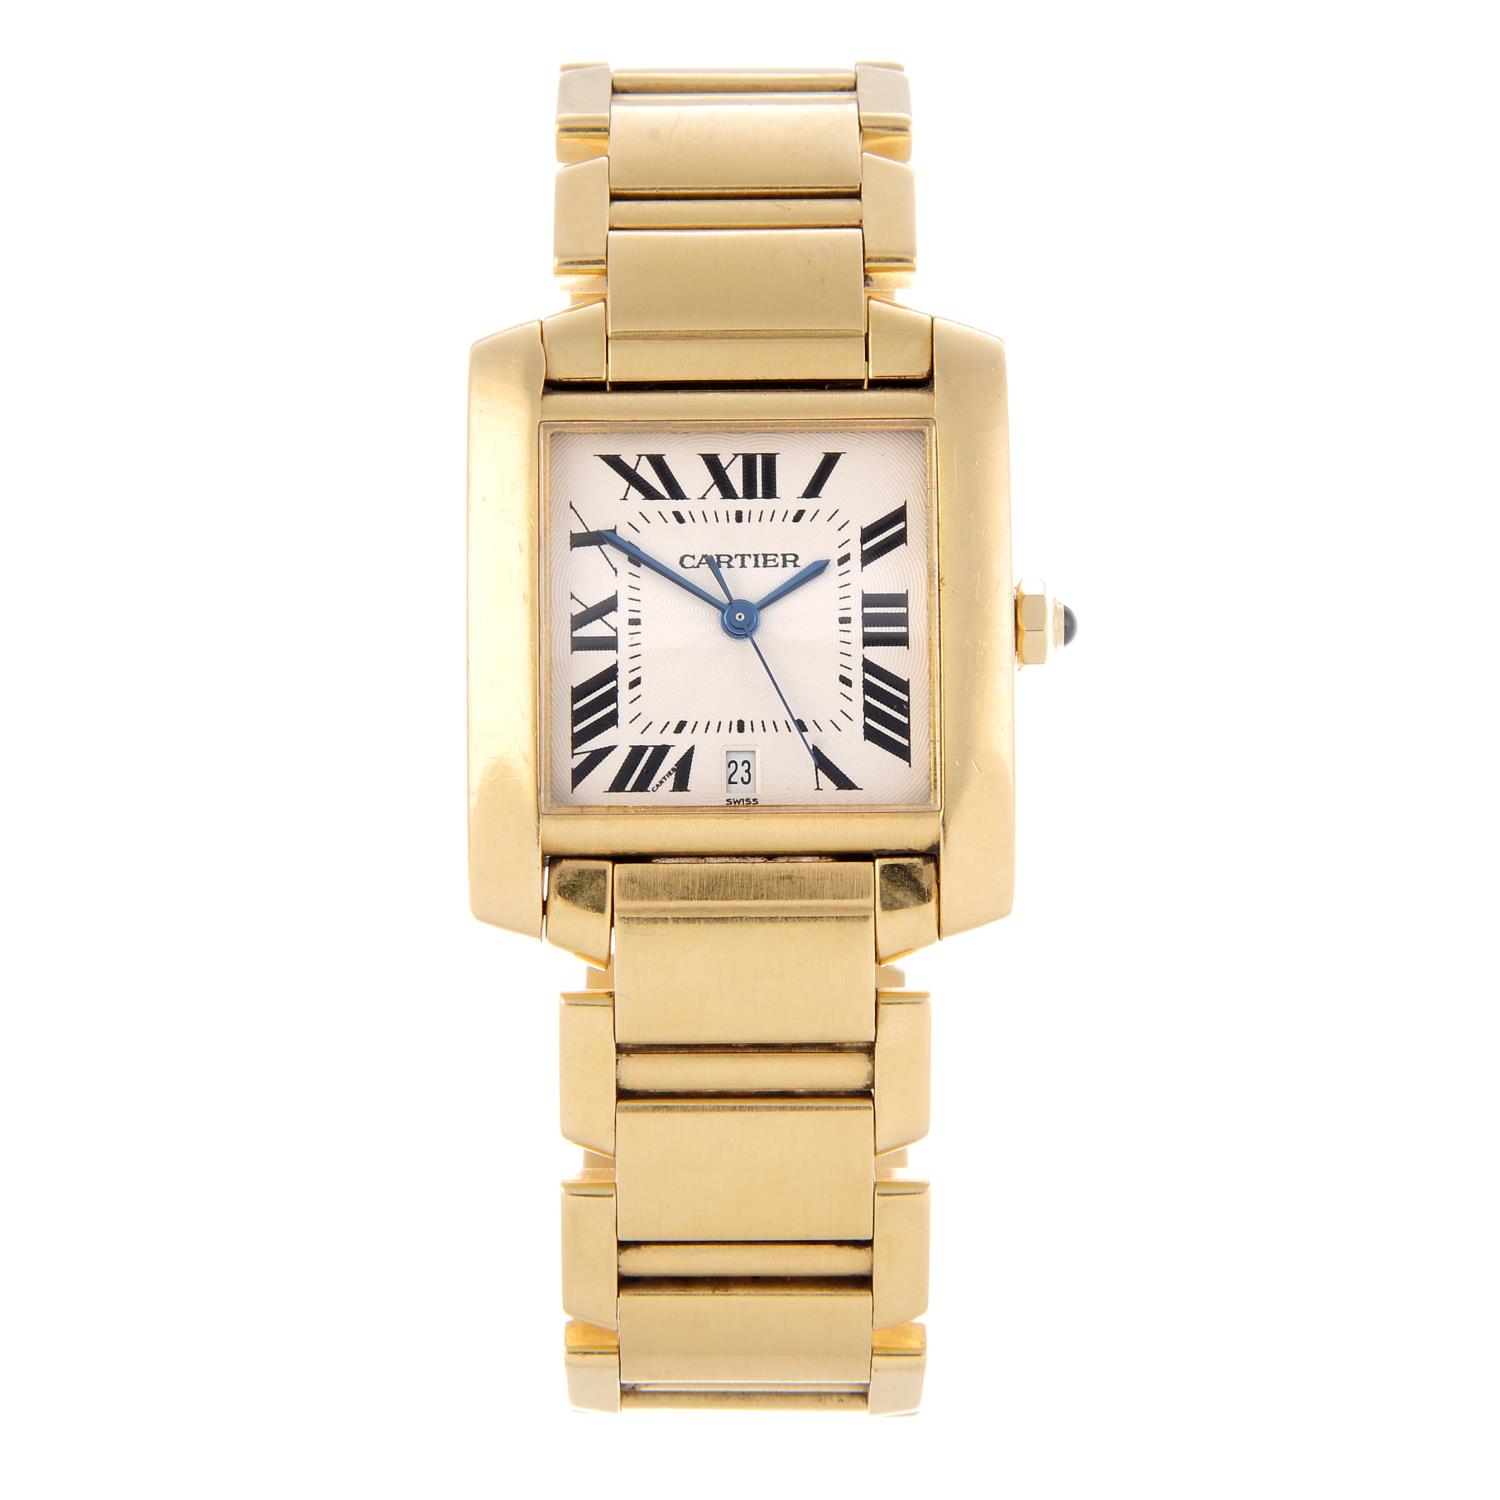 CARTIER - a Tank Francaise bracelet watch. 18ct yellow gold case. Reference 1840, serial MG260407.